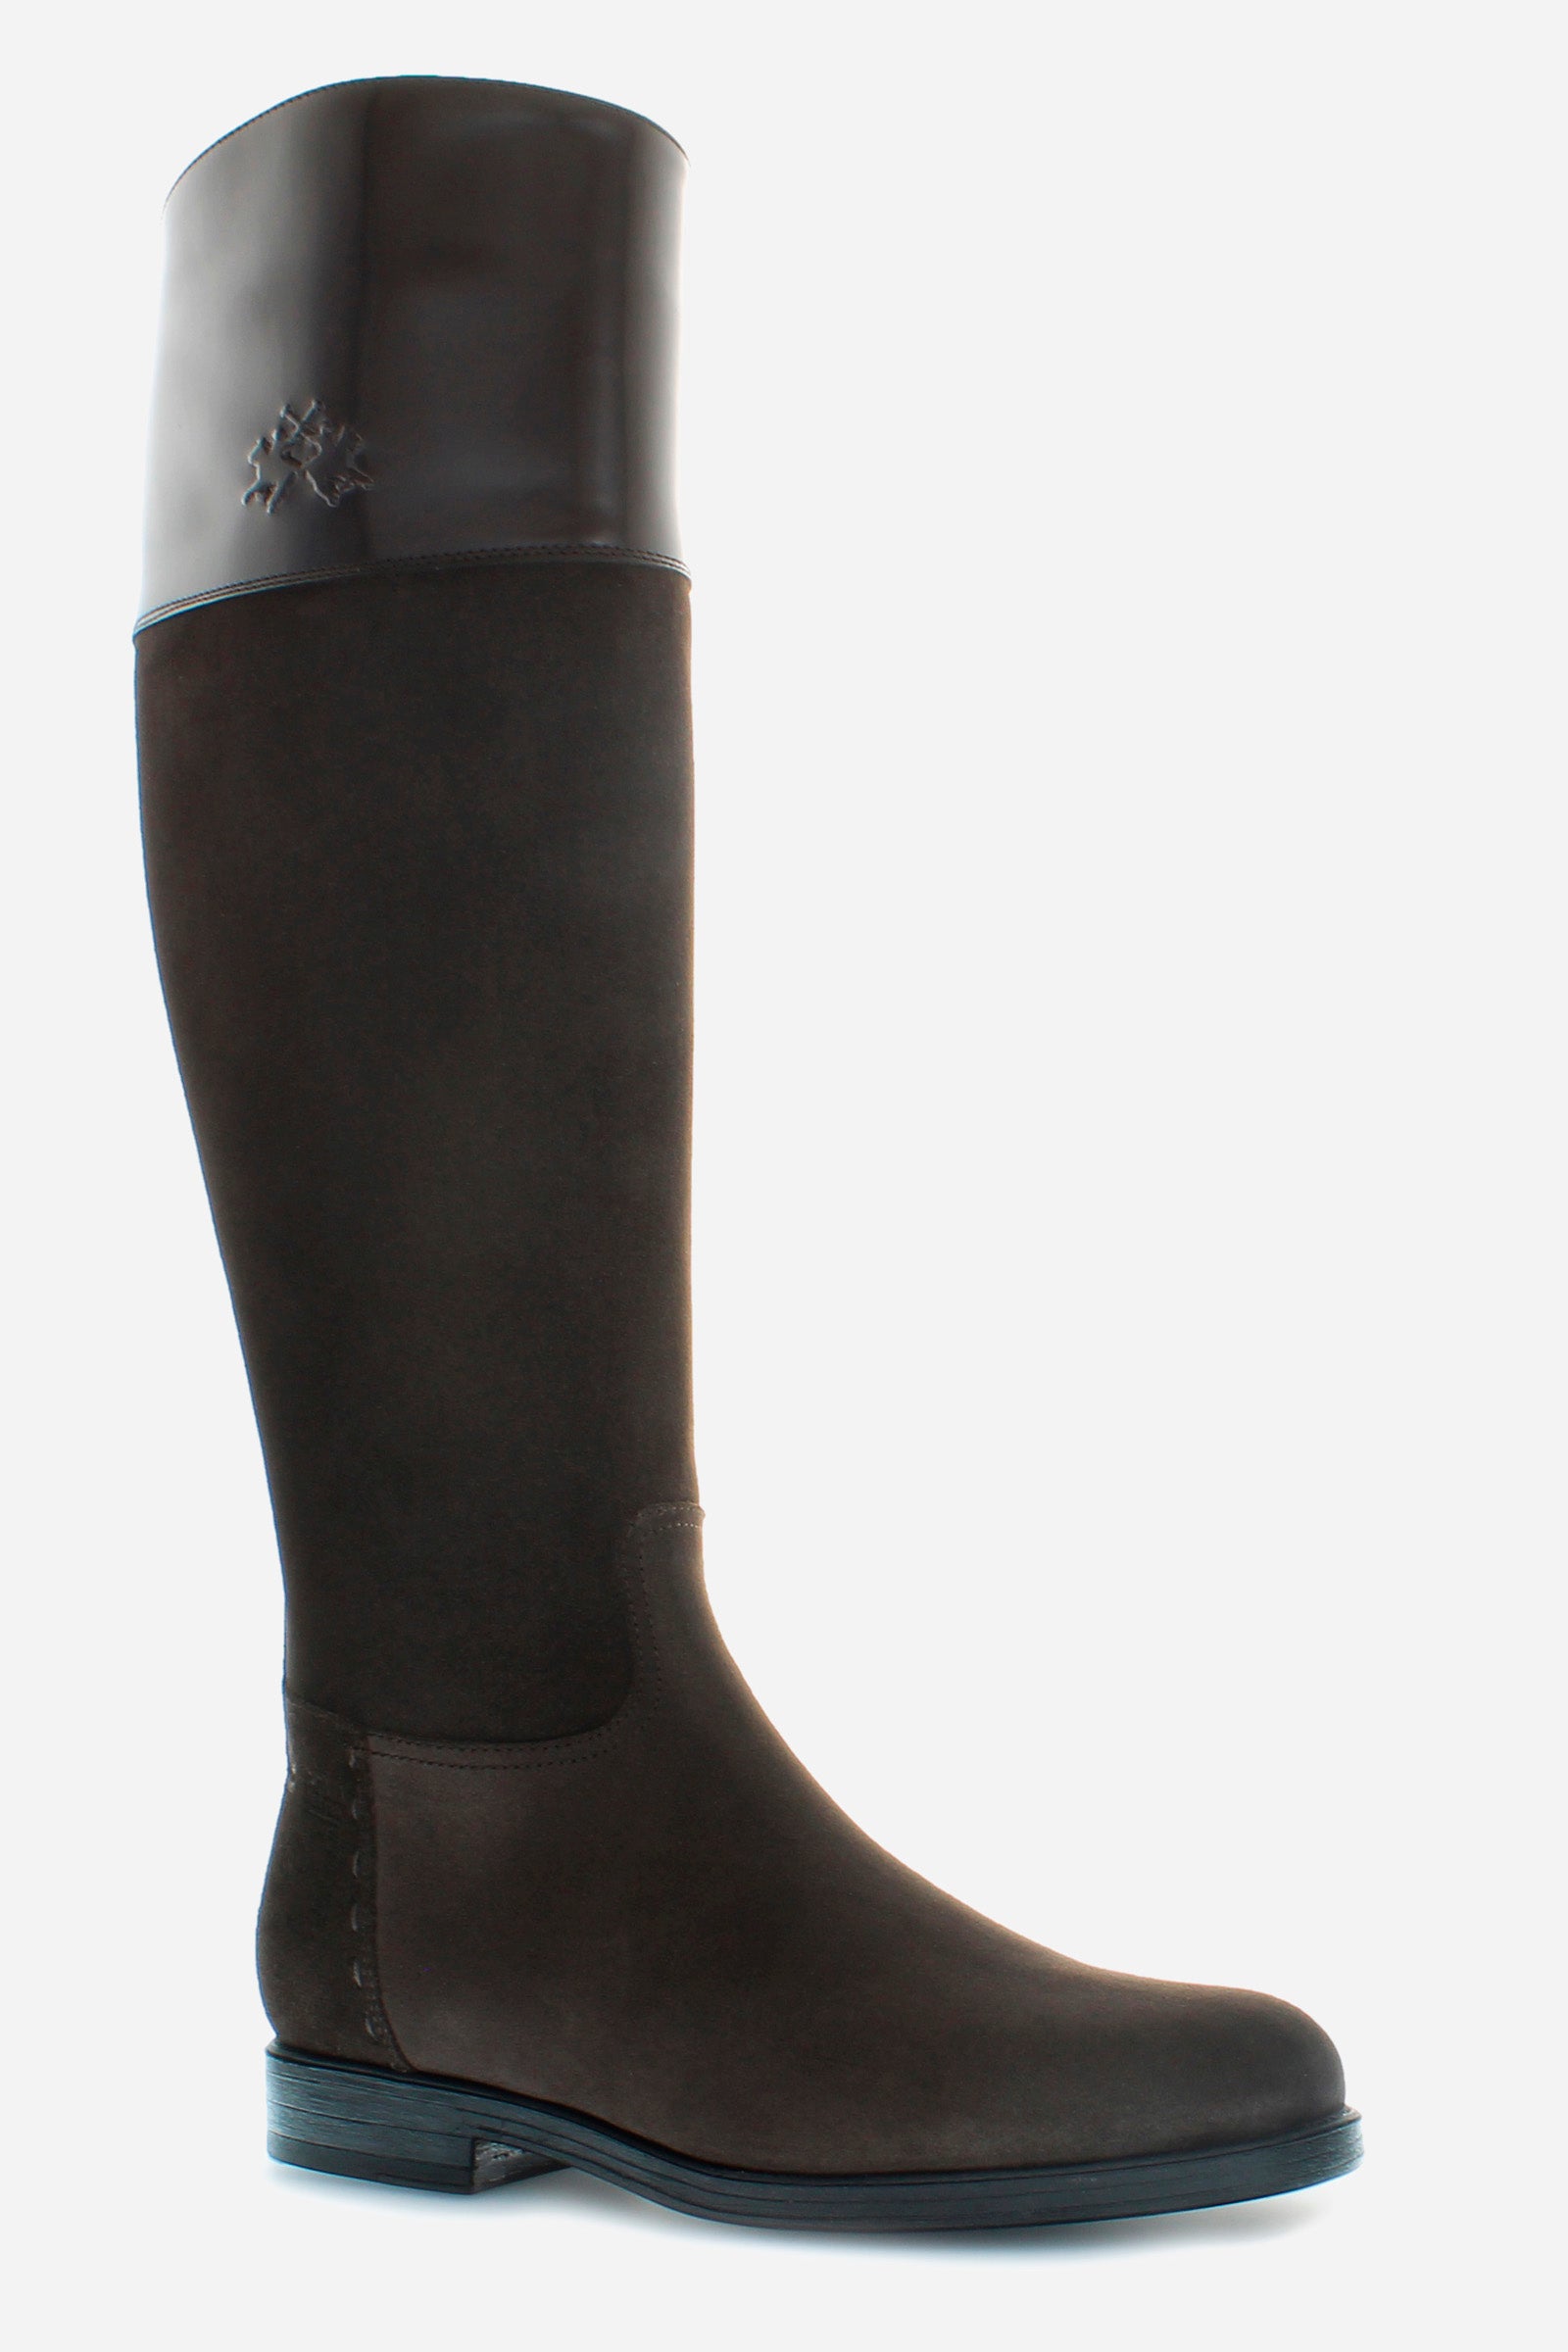 Women’s equestrian style boot in suede